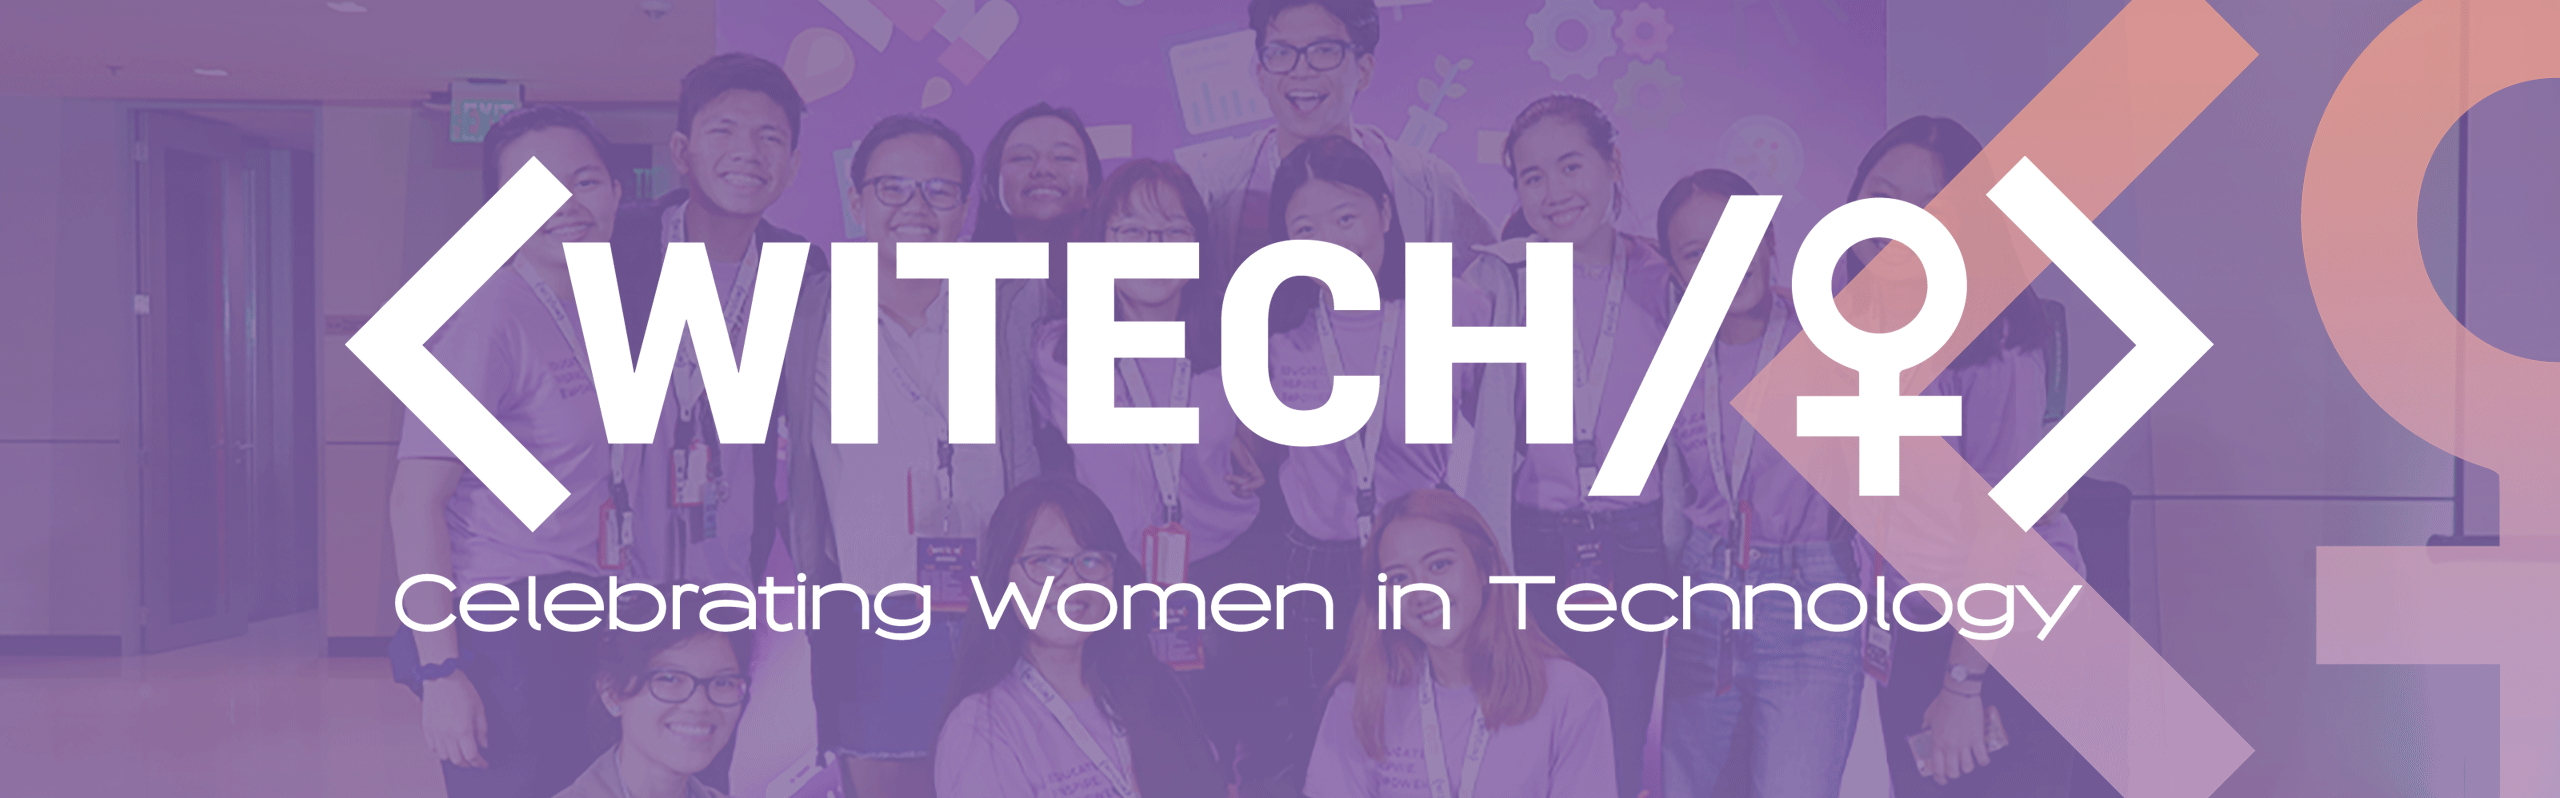 The nonprofit WiTech uses Calendly to encourage gender equity in tech.